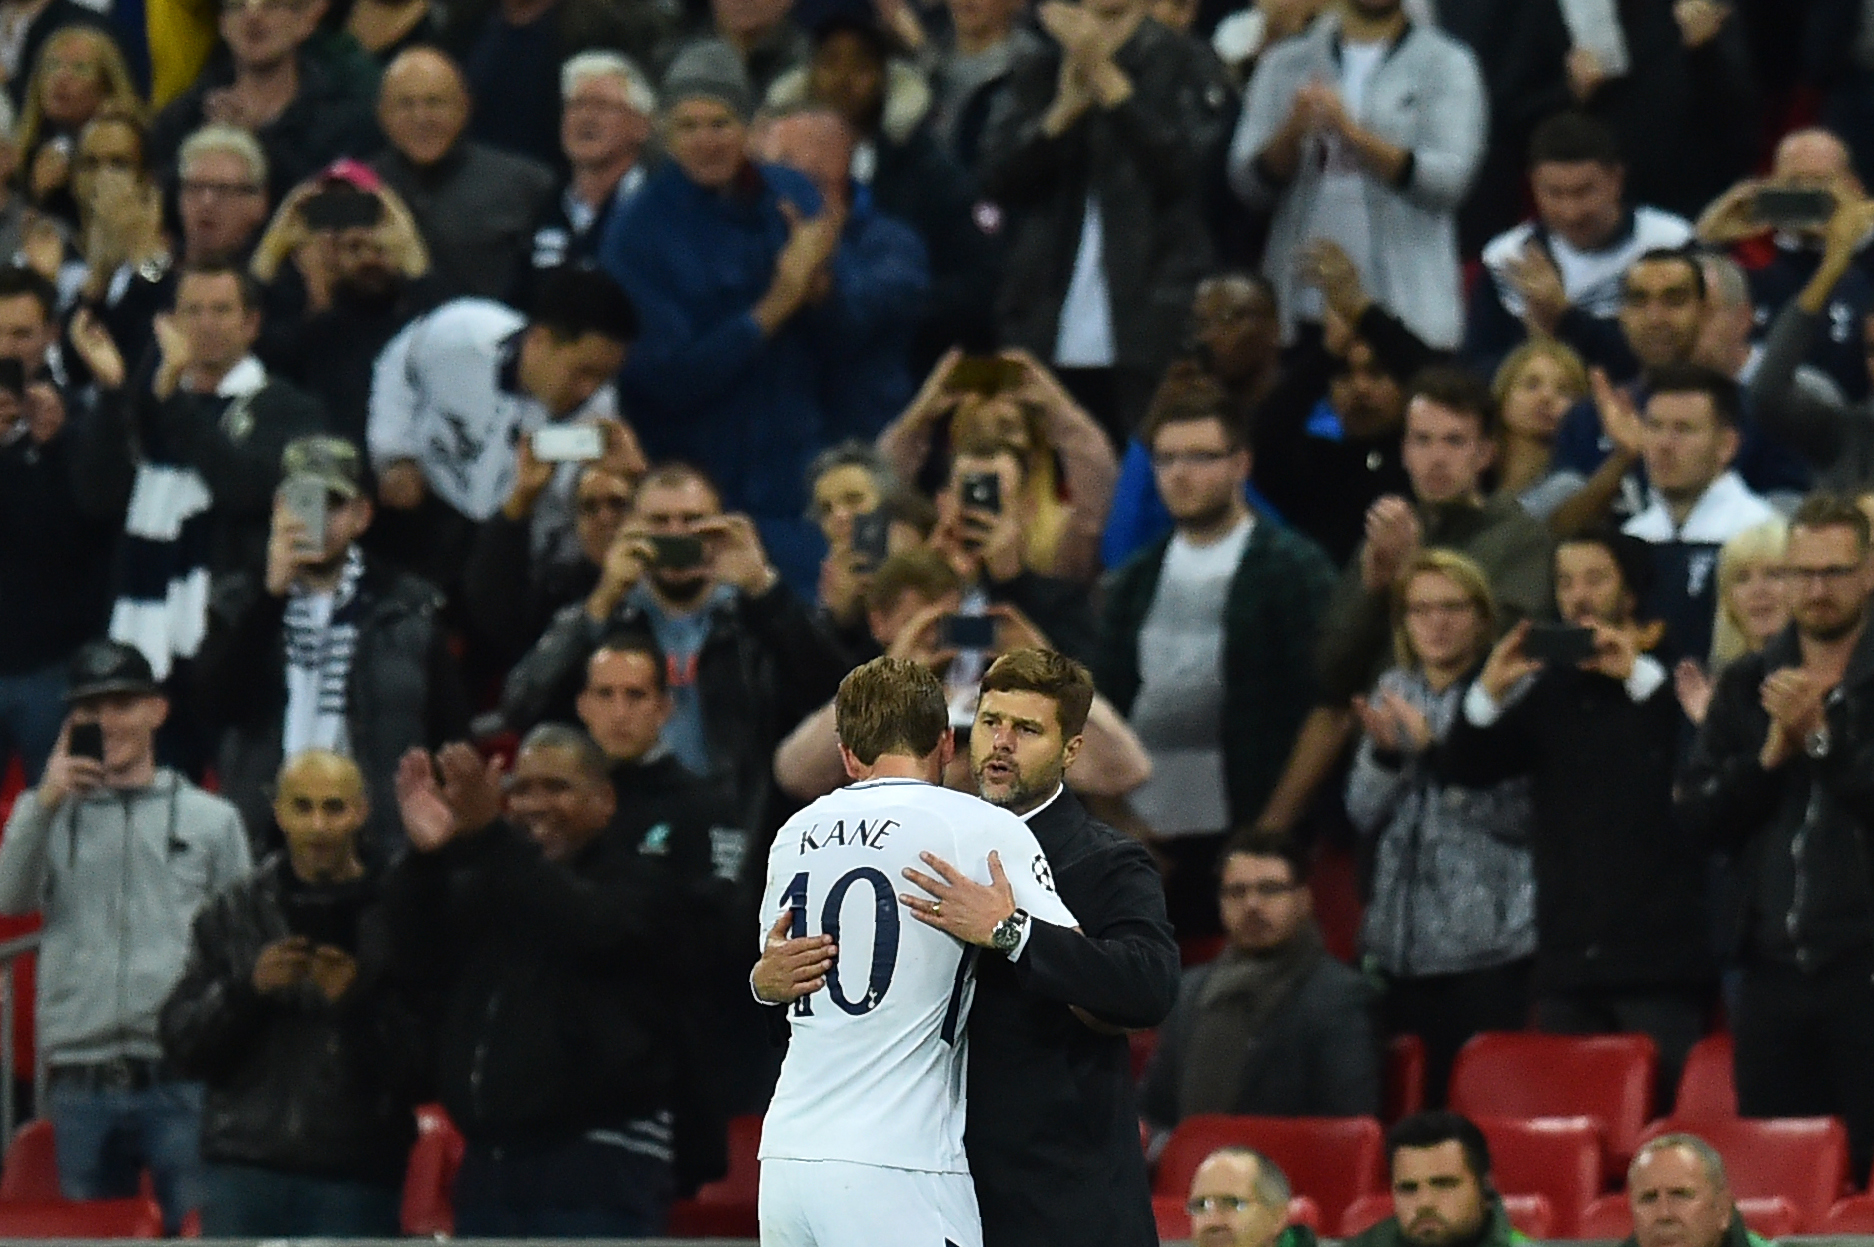 Tottenham Hotspur's English striker Harry Kane is embraced by Tottenham Hotspur's Argentinian head coach Mauricio Pochettino after being substituted during the UEFA Champions League Group H football match between Tottenham Hotspur and Borussia Dortmund at Wembley Stadium in London, on September 13, 2017. / AFP PHOTO / Glyn KIRK        (Photo credit should read GLYN KIRK/AFP/Getty Images)